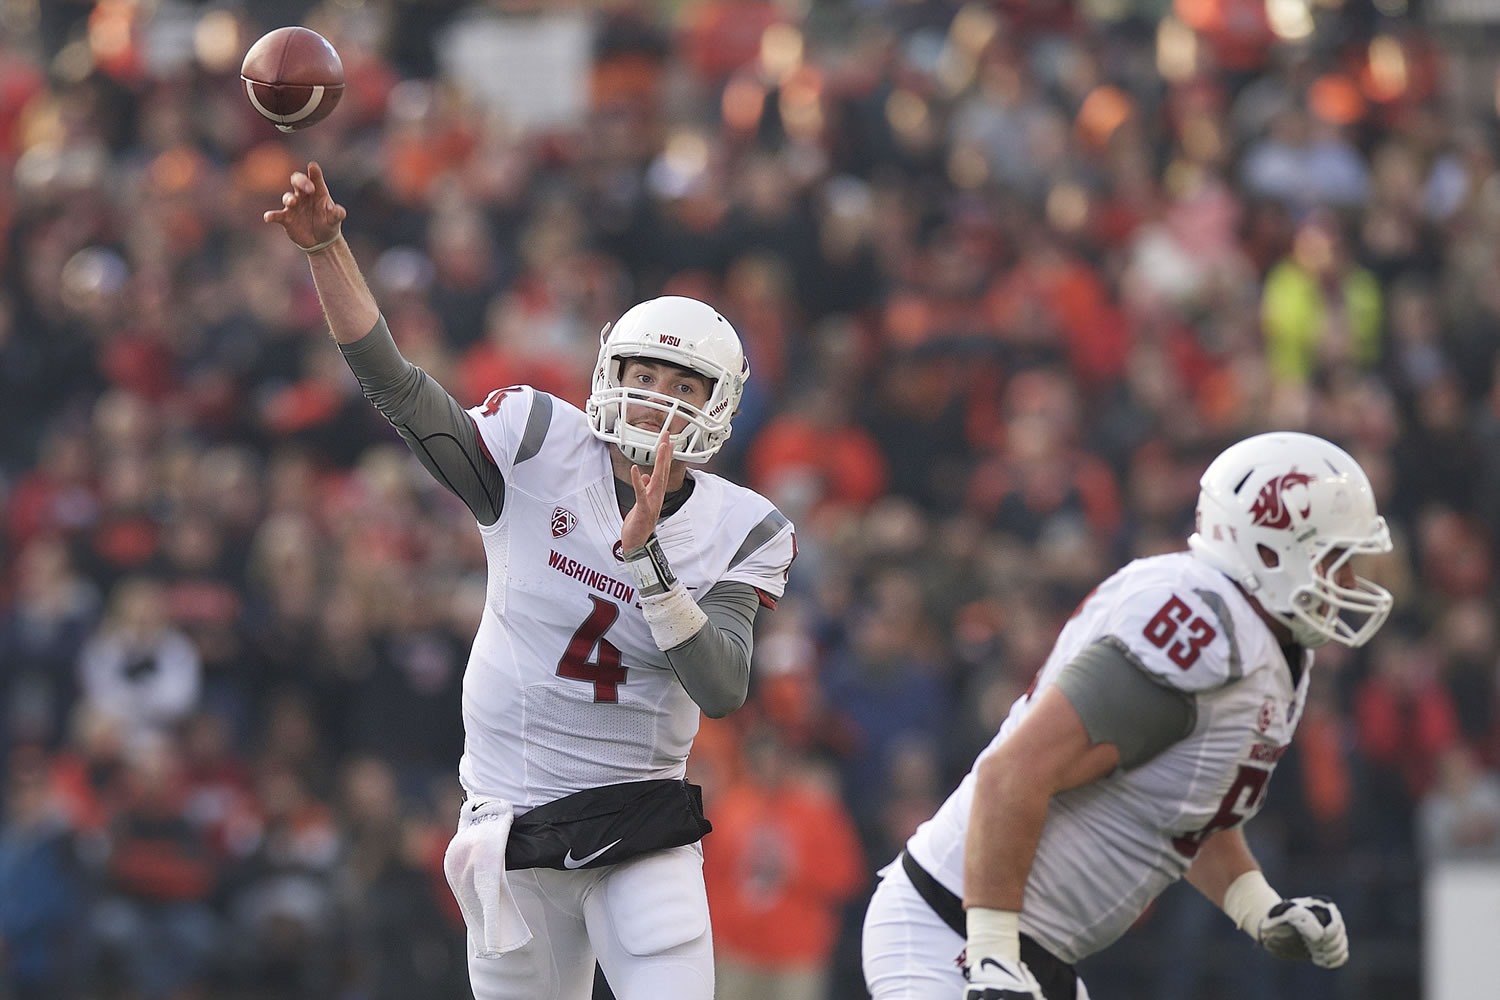 Washington State quarterback Luke Falk (4) was the Pac-12 offensive player of the week after throwing for 471 yards and five TDs.